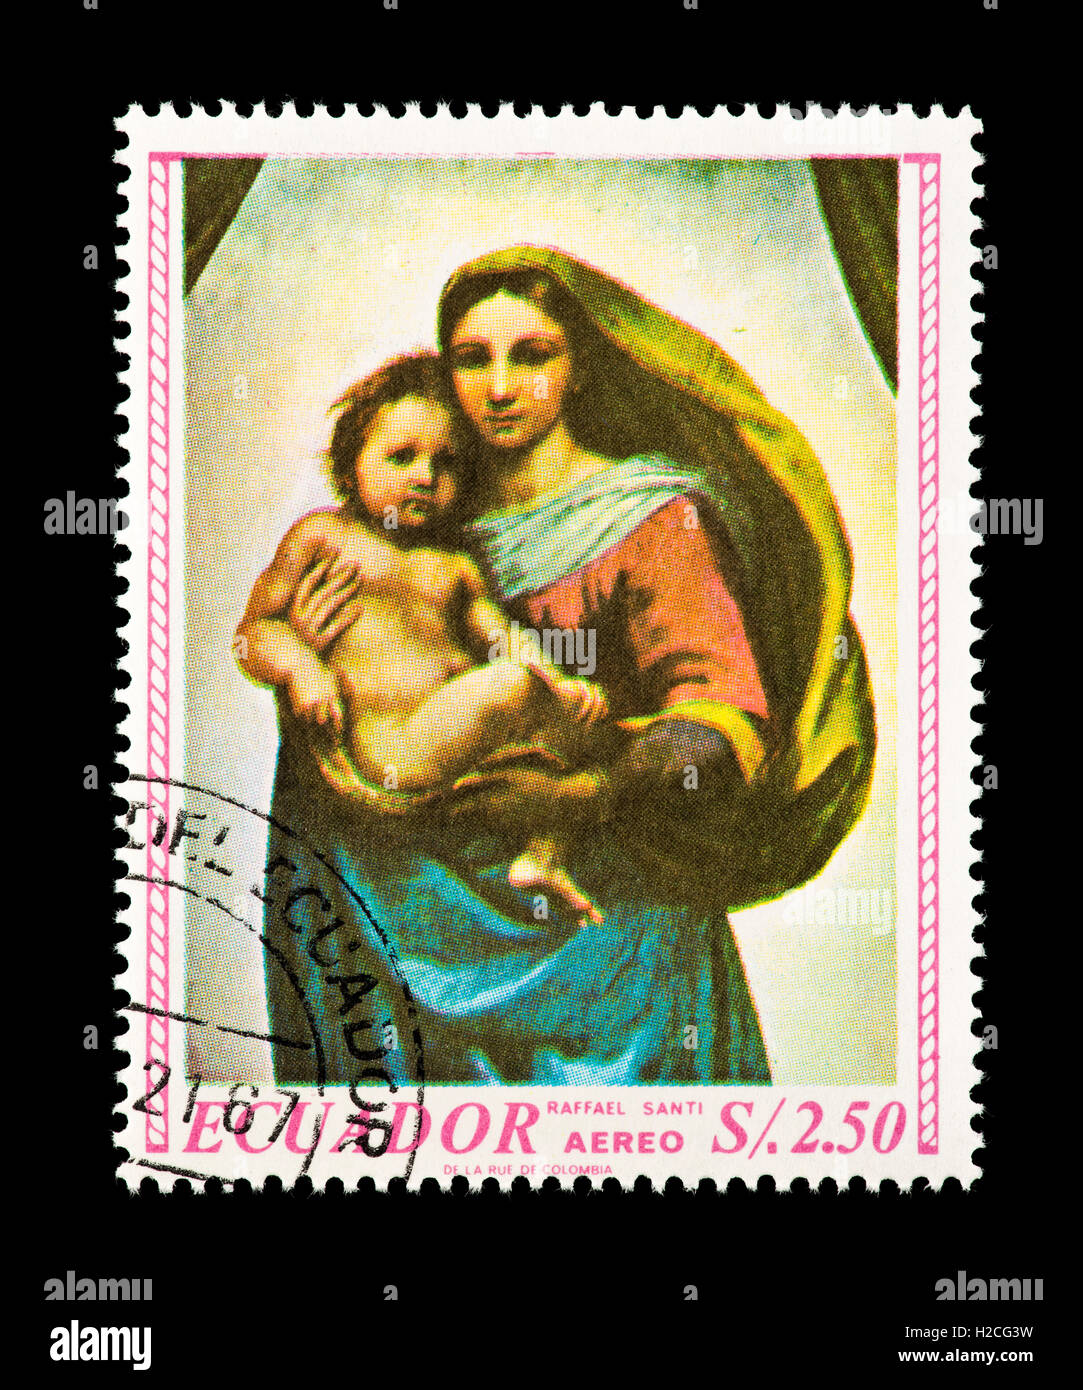 Postage stamp from Ecuador depicting the Raphael painting of Madonna and child in the Sistine Chapel. Stock Photo